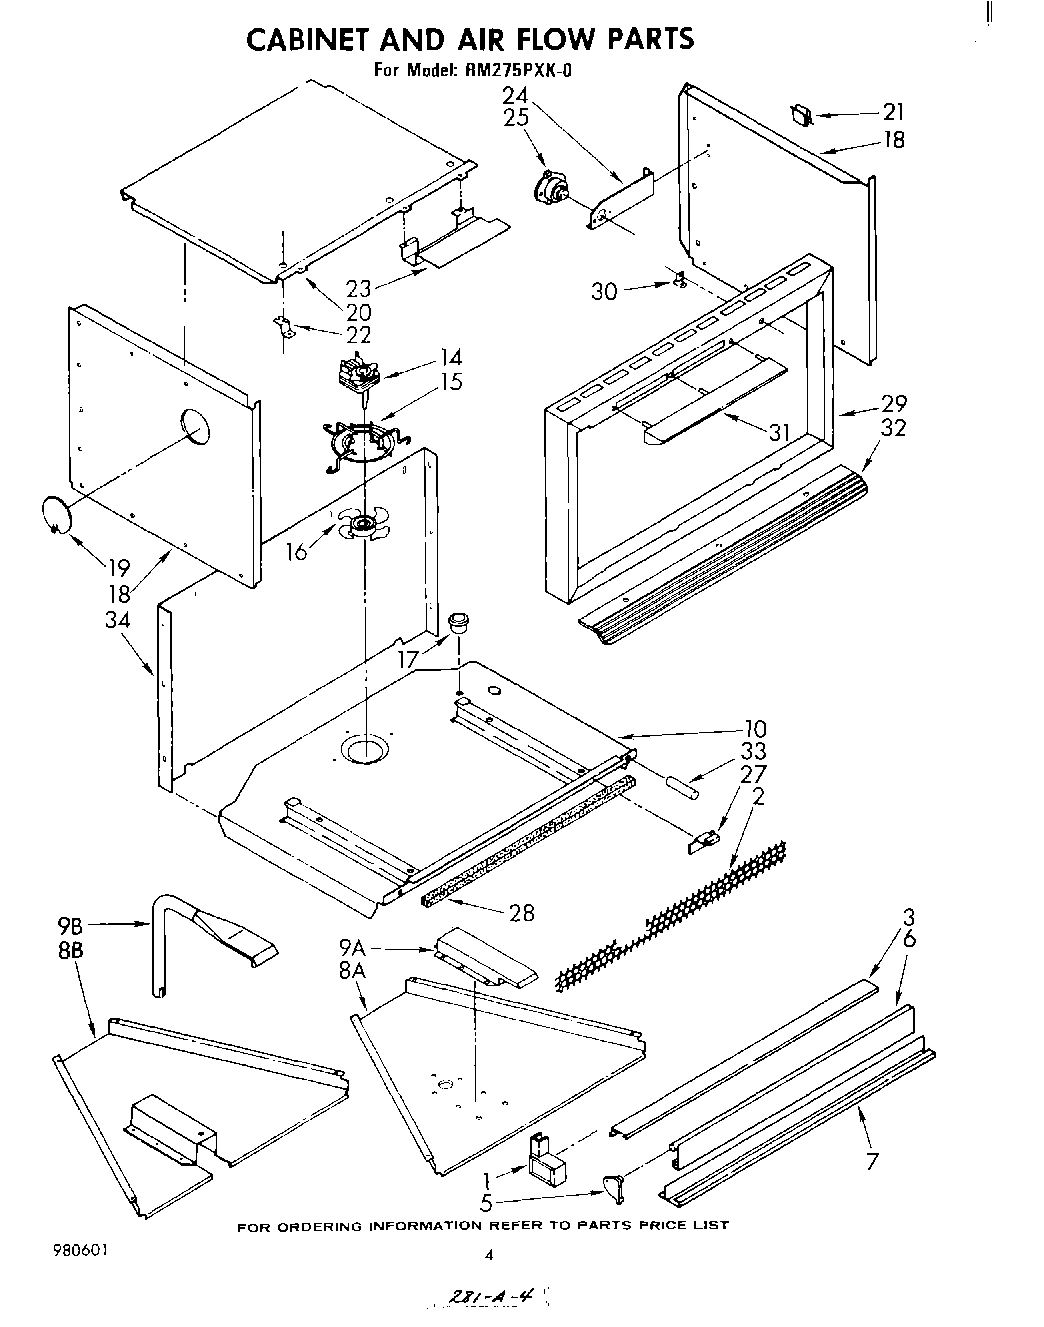 03 - CABINET AND AIR FLOW